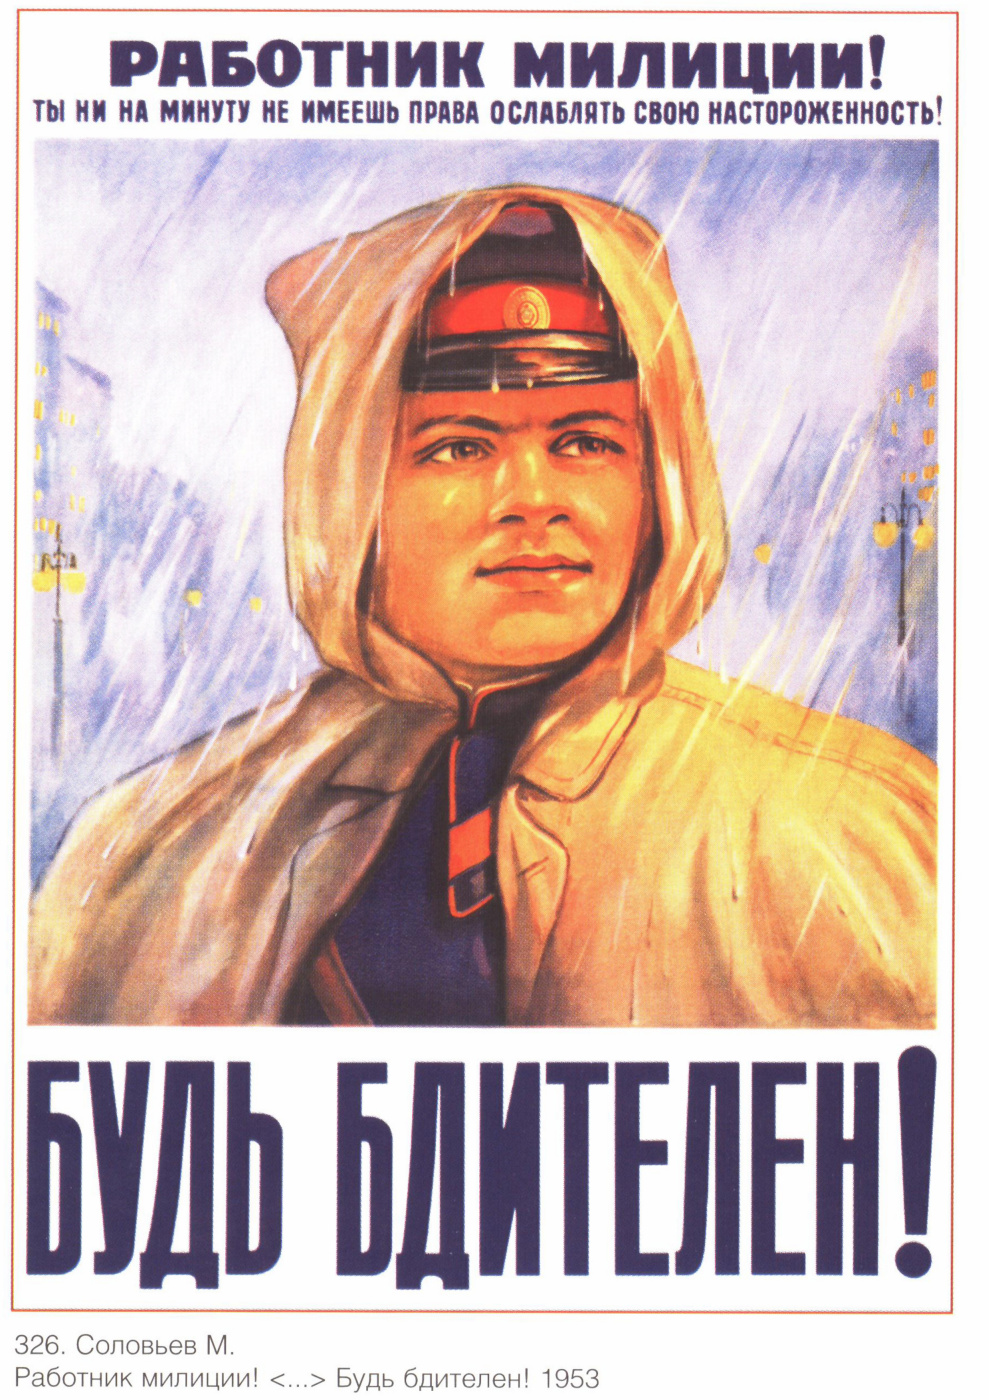 Posters USSR. A police officer! Be vigilant!